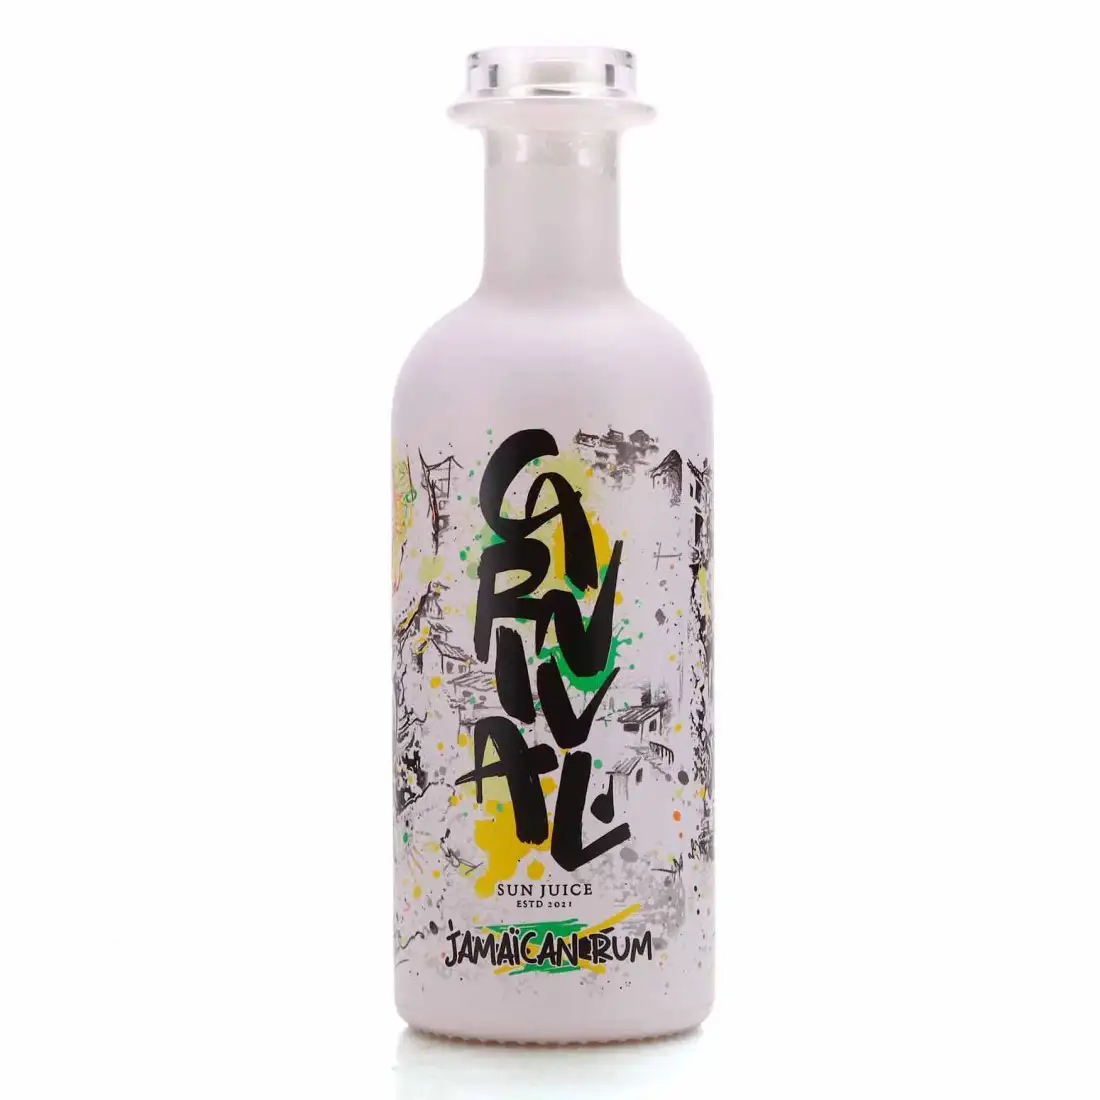 Image of the front of the bottle of the rum Carnival Jamaican Rum